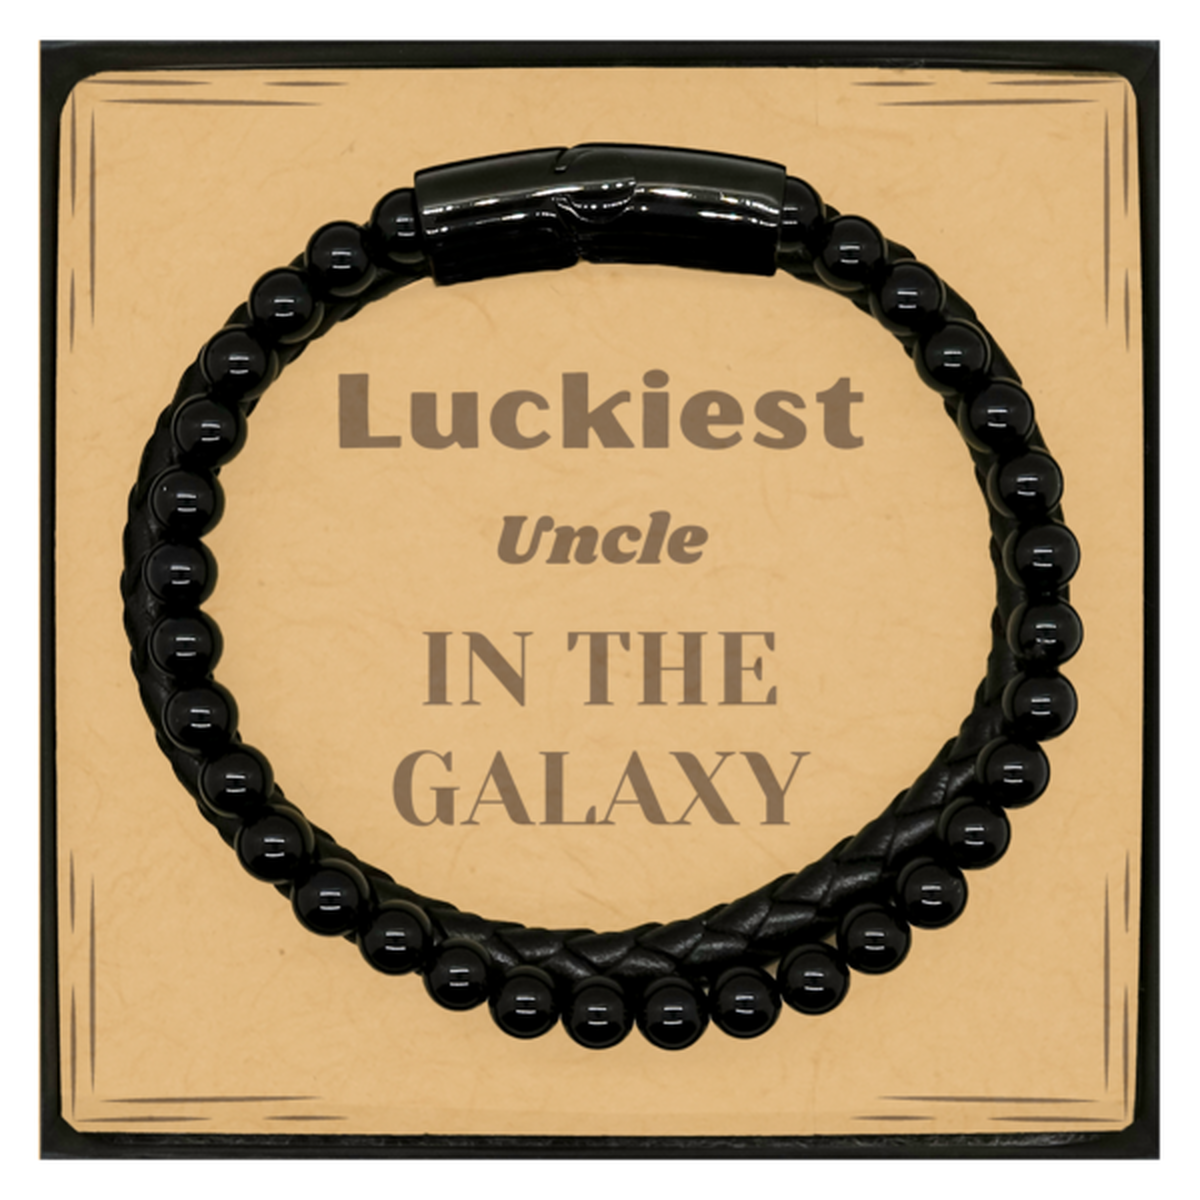 Luckiest Uncle in the Galaxy, To My Uncle Message Card Gifts, Christmas Uncle Stone Leather Bracelets Gifts, X-mas Birthday Unique Gifts For Uncle Men Women